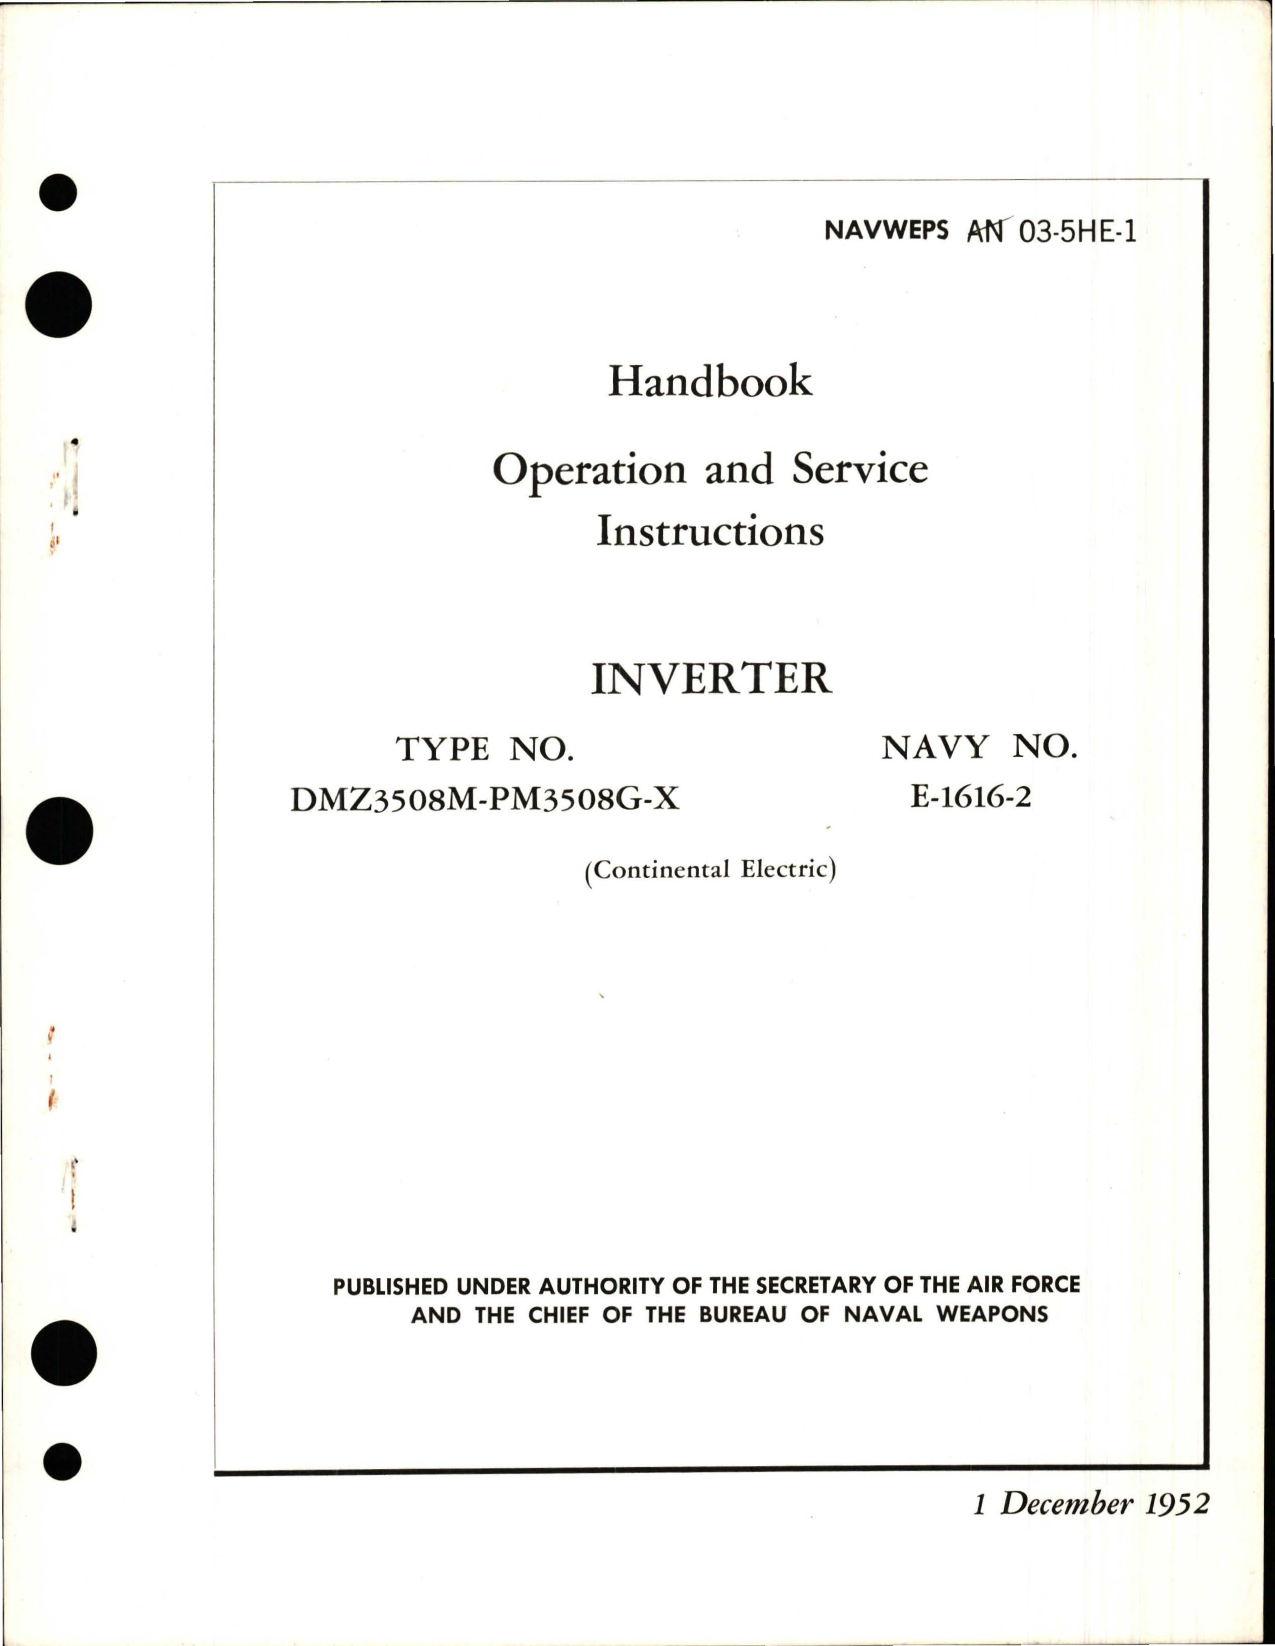 Sample page 1 from AirCorps Library document: Operation and Service Instructions for Inverter - Type DMZ3508M-PM3508G-X